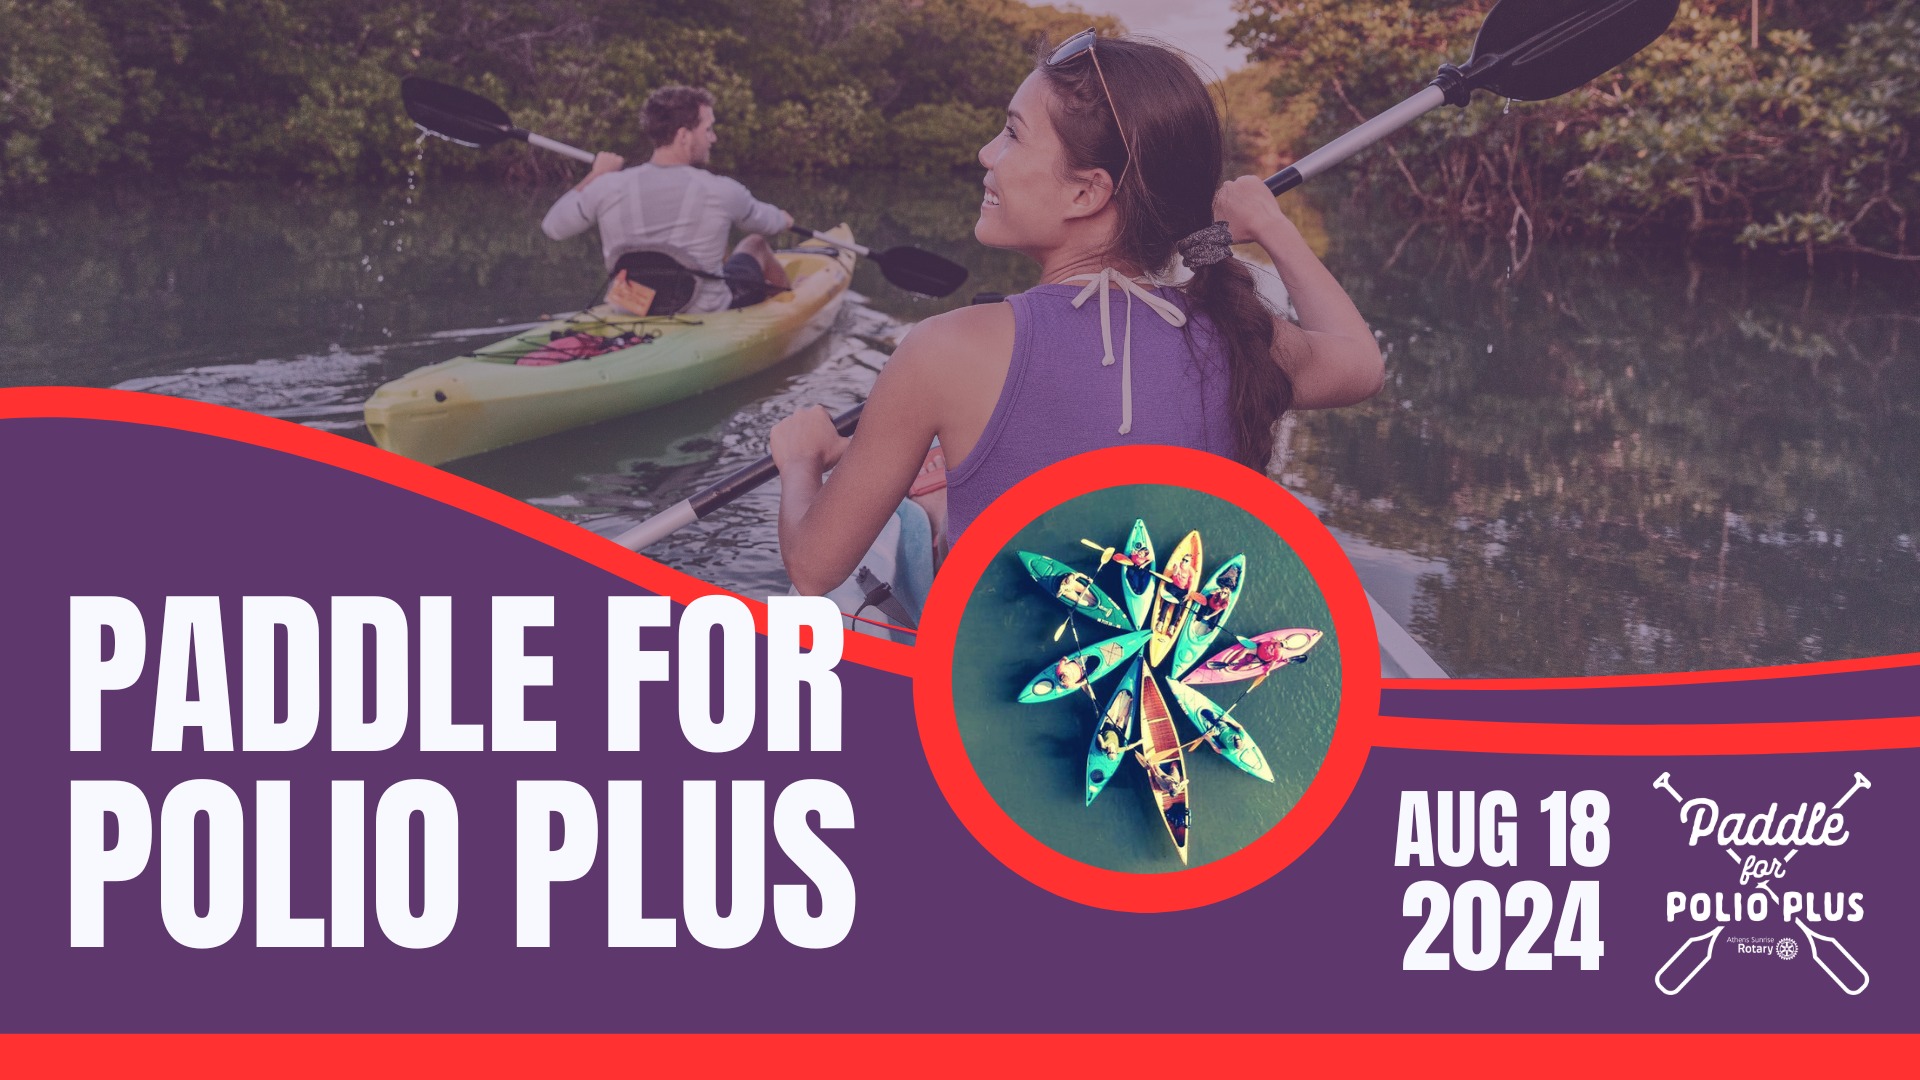 A promotional image for "Paddle for Polio Plus," and event being organized by the Athens Sunrise Rotary.